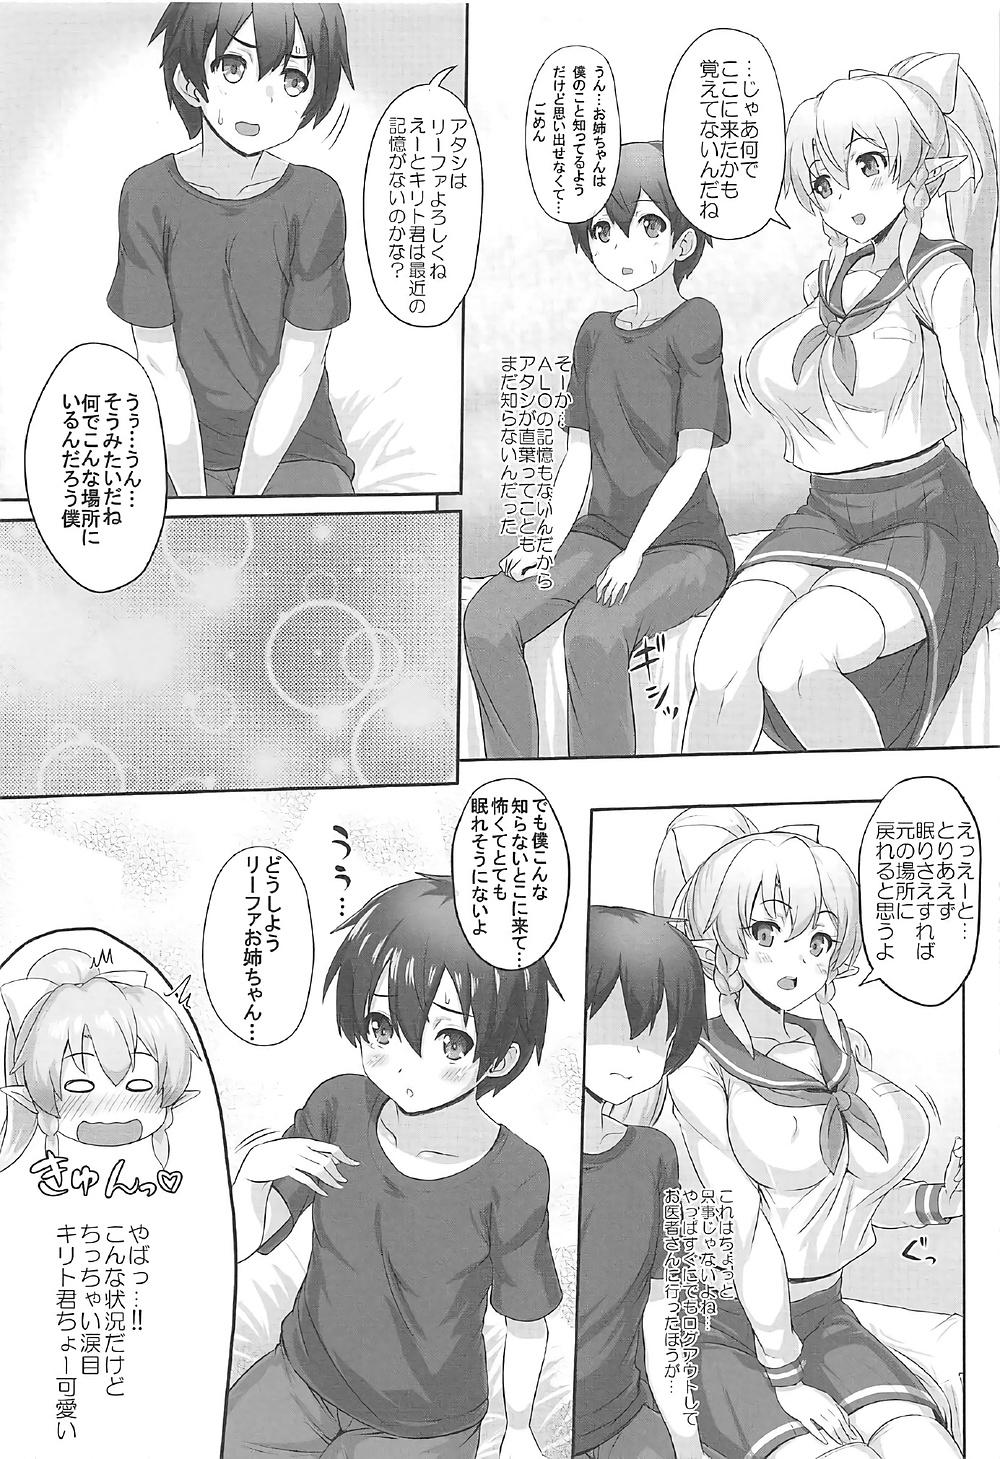 Interracial Hardcore SAOn REVERSE - Sword art online From - Page 4